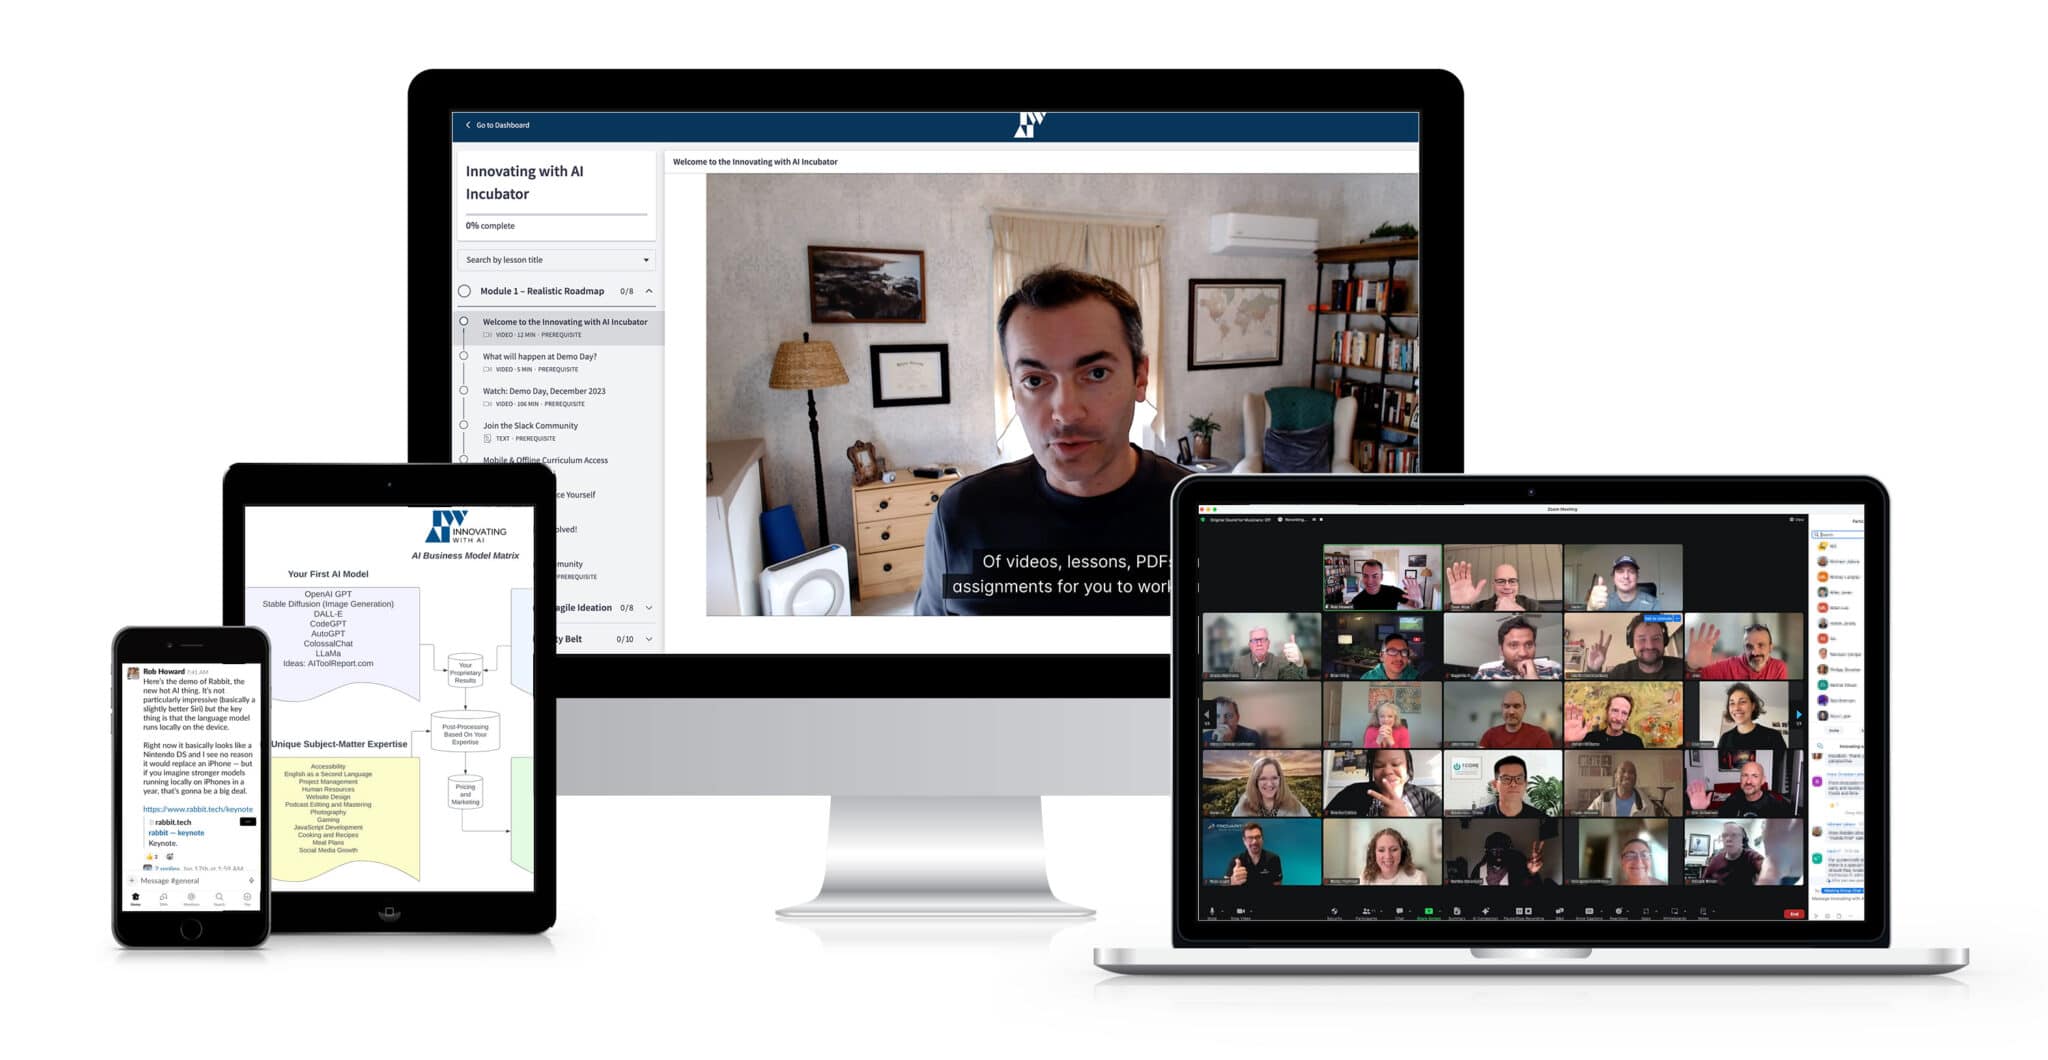 The image displays a range of devices showing a video conference and educational content, representing remote work and online learning platforms.